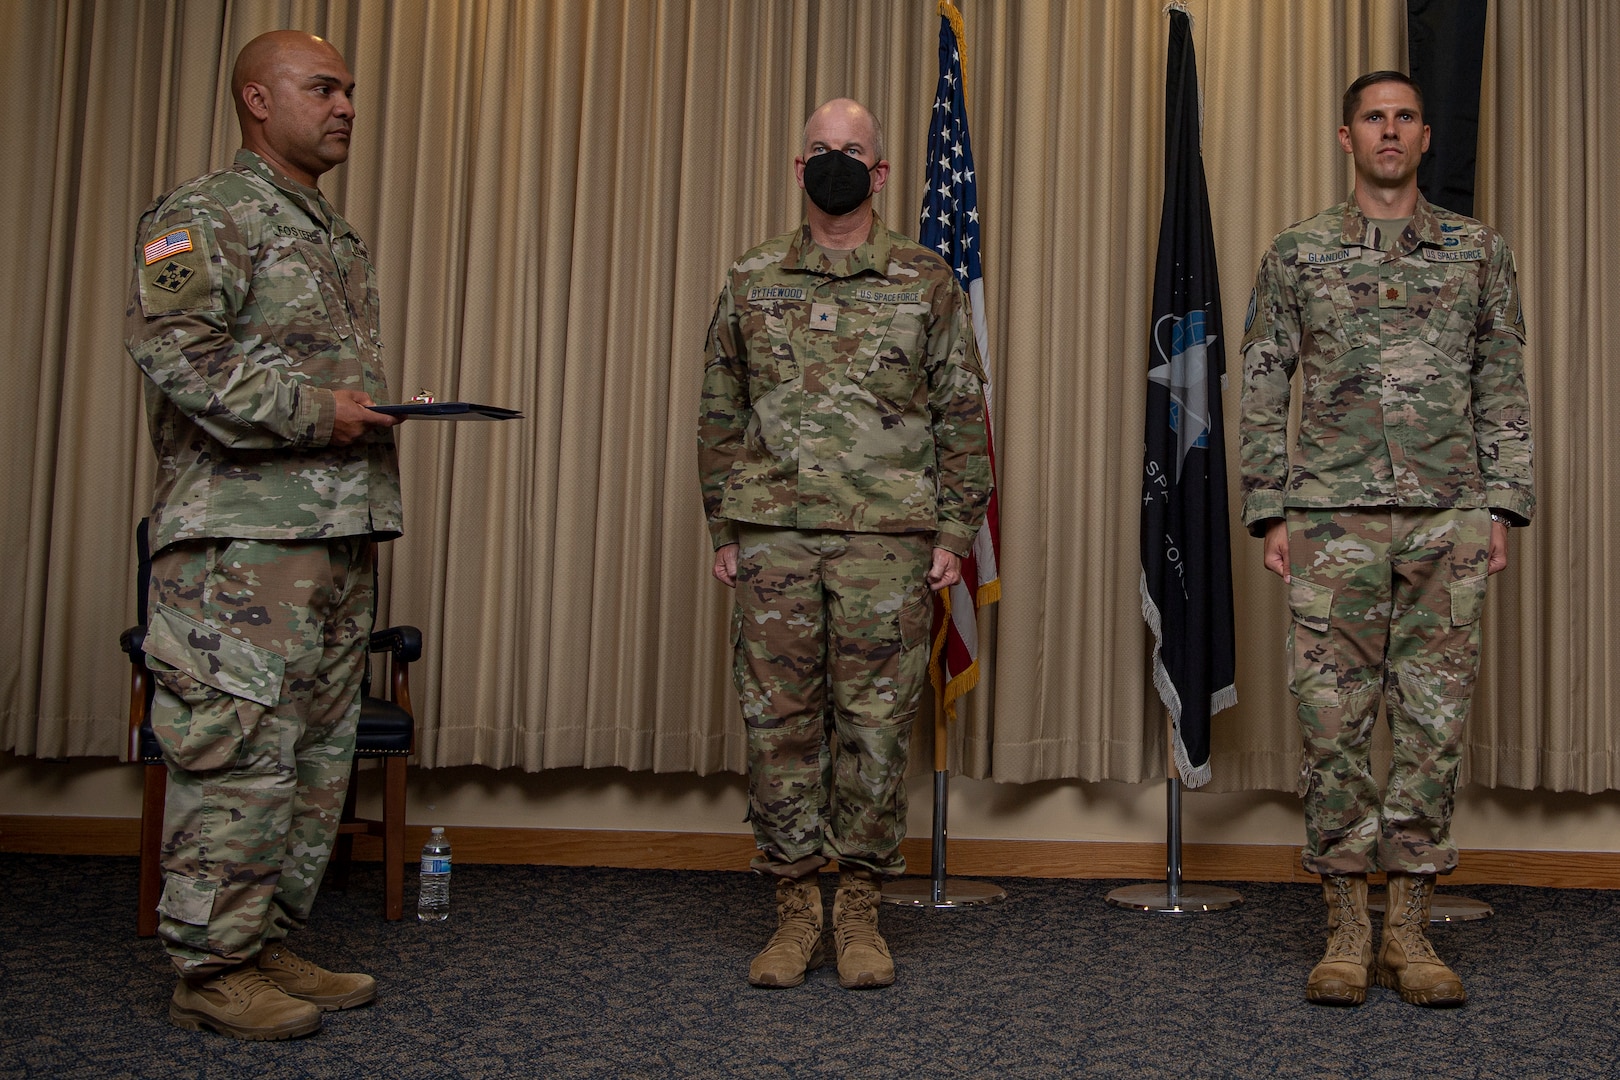 Three military members in uniform stand at attention prior to an award presentation